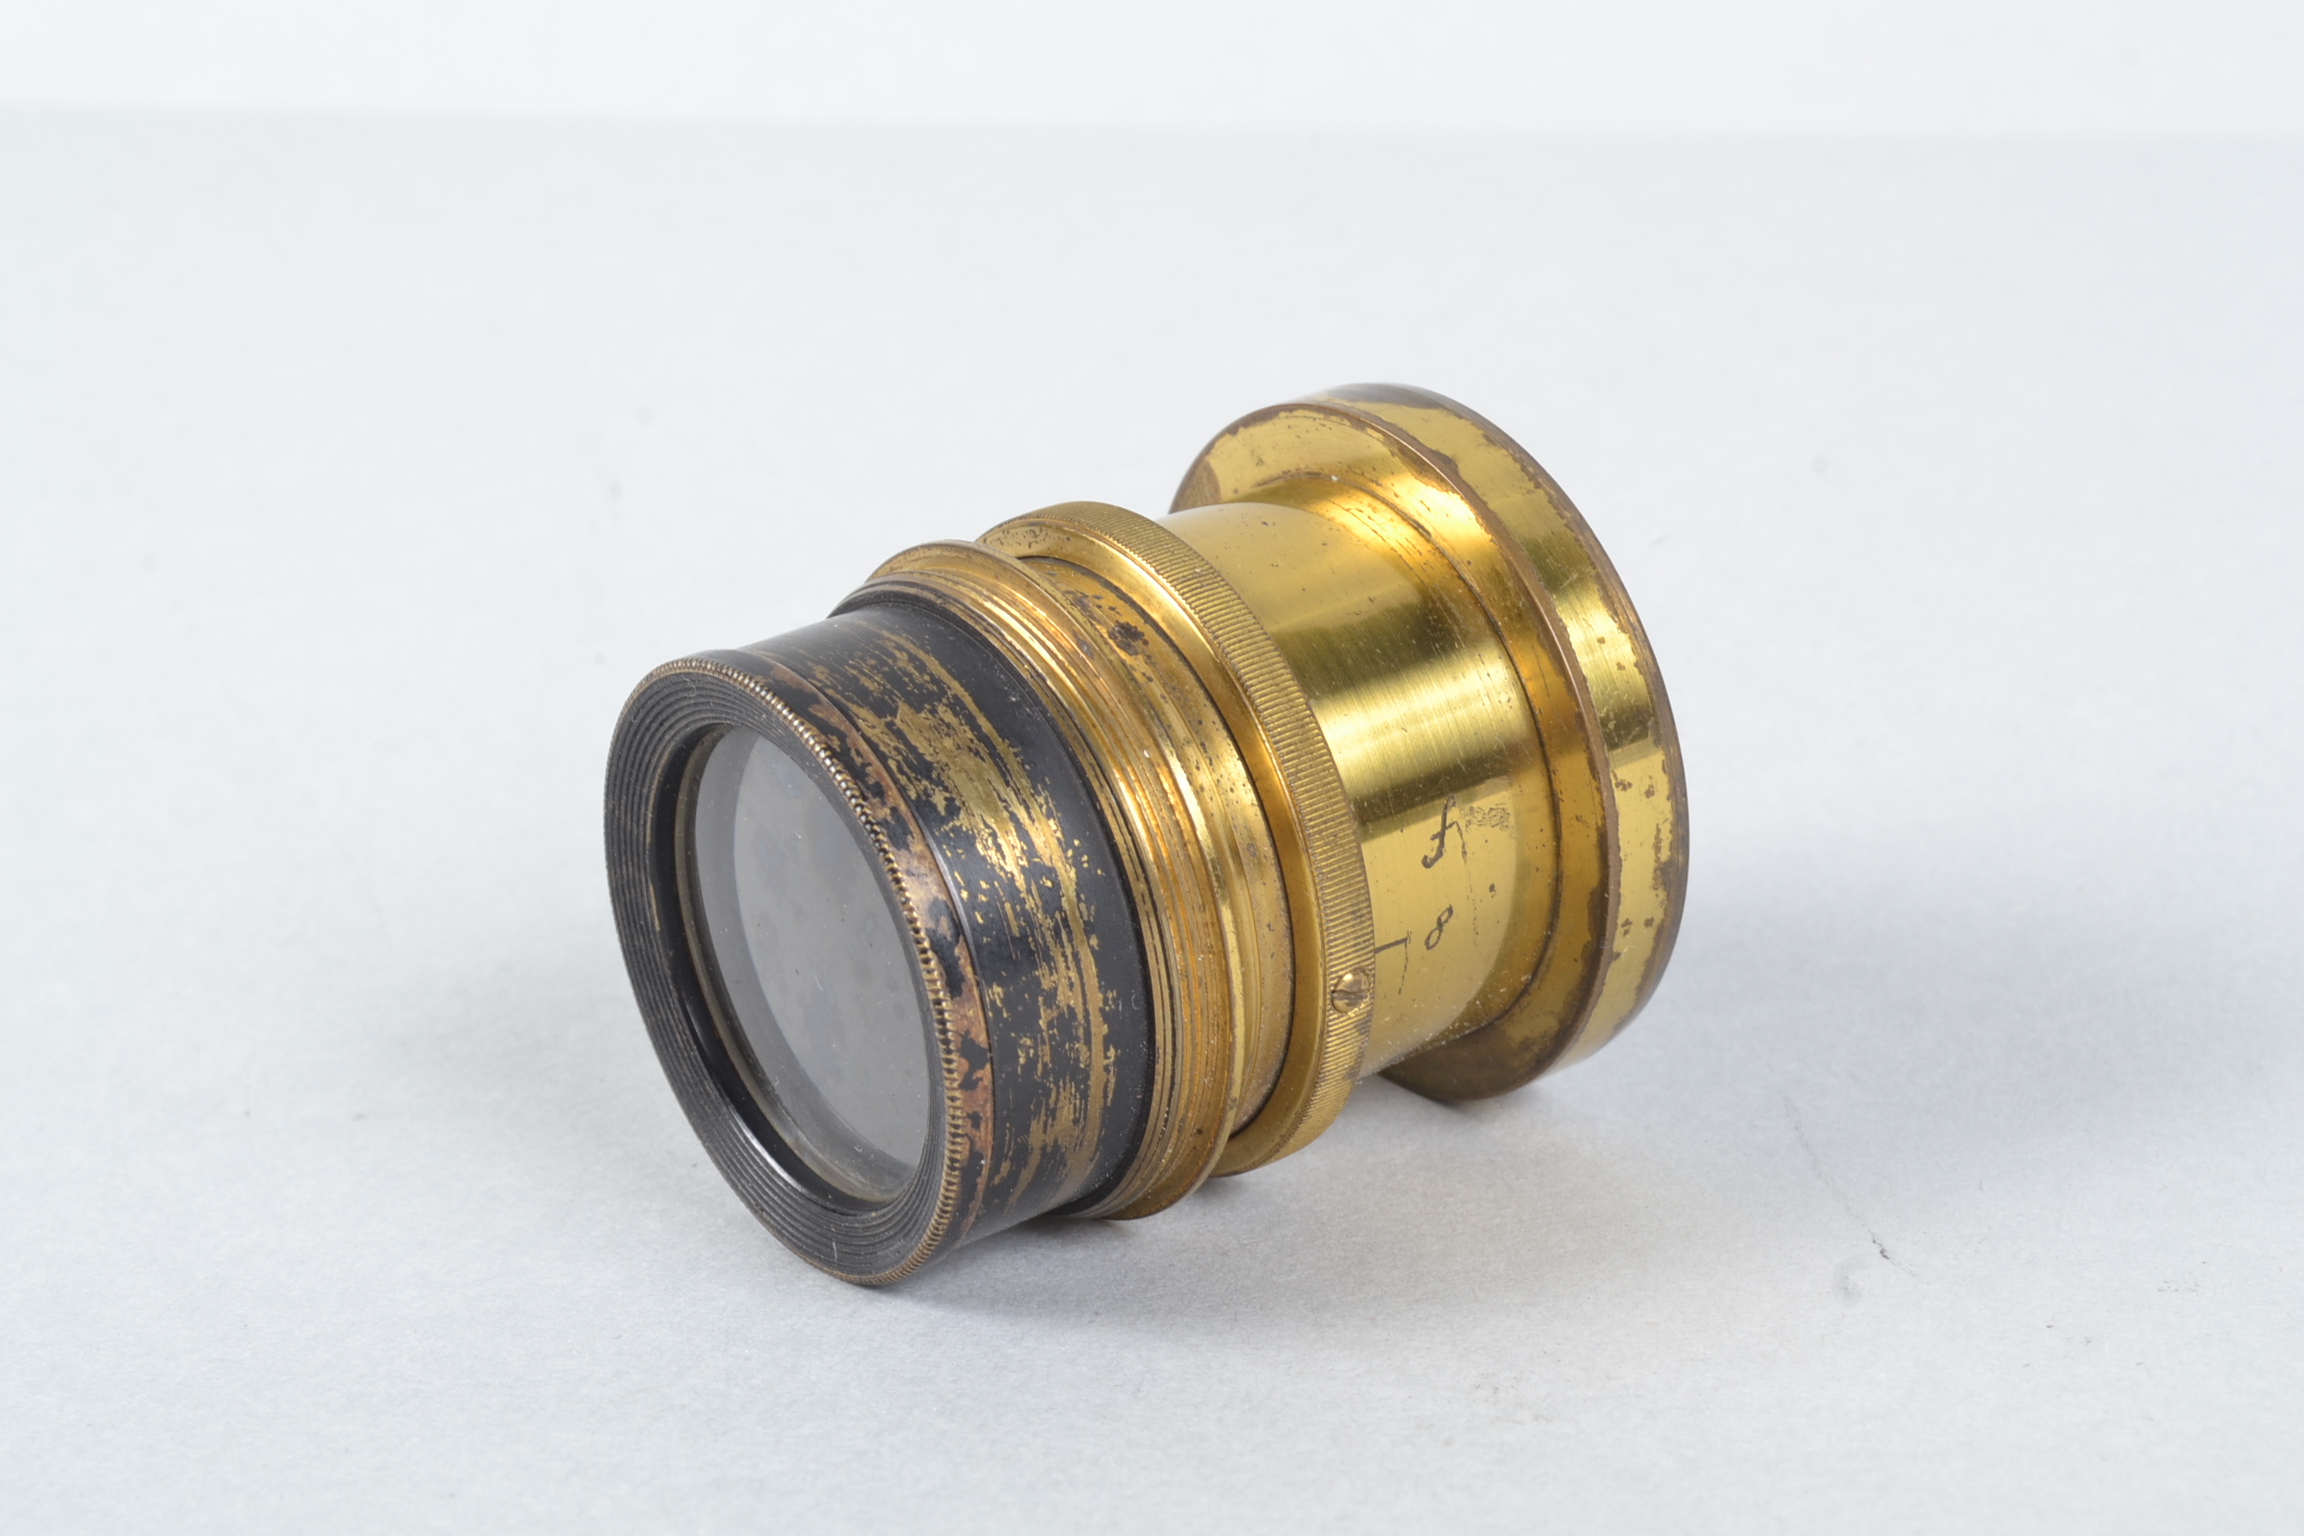 A Pair of Thornton-Pickard Rectoplanat Brass Lenses, each f/8, 9in approx focal length, barrels P-F, - Image 6 of 6